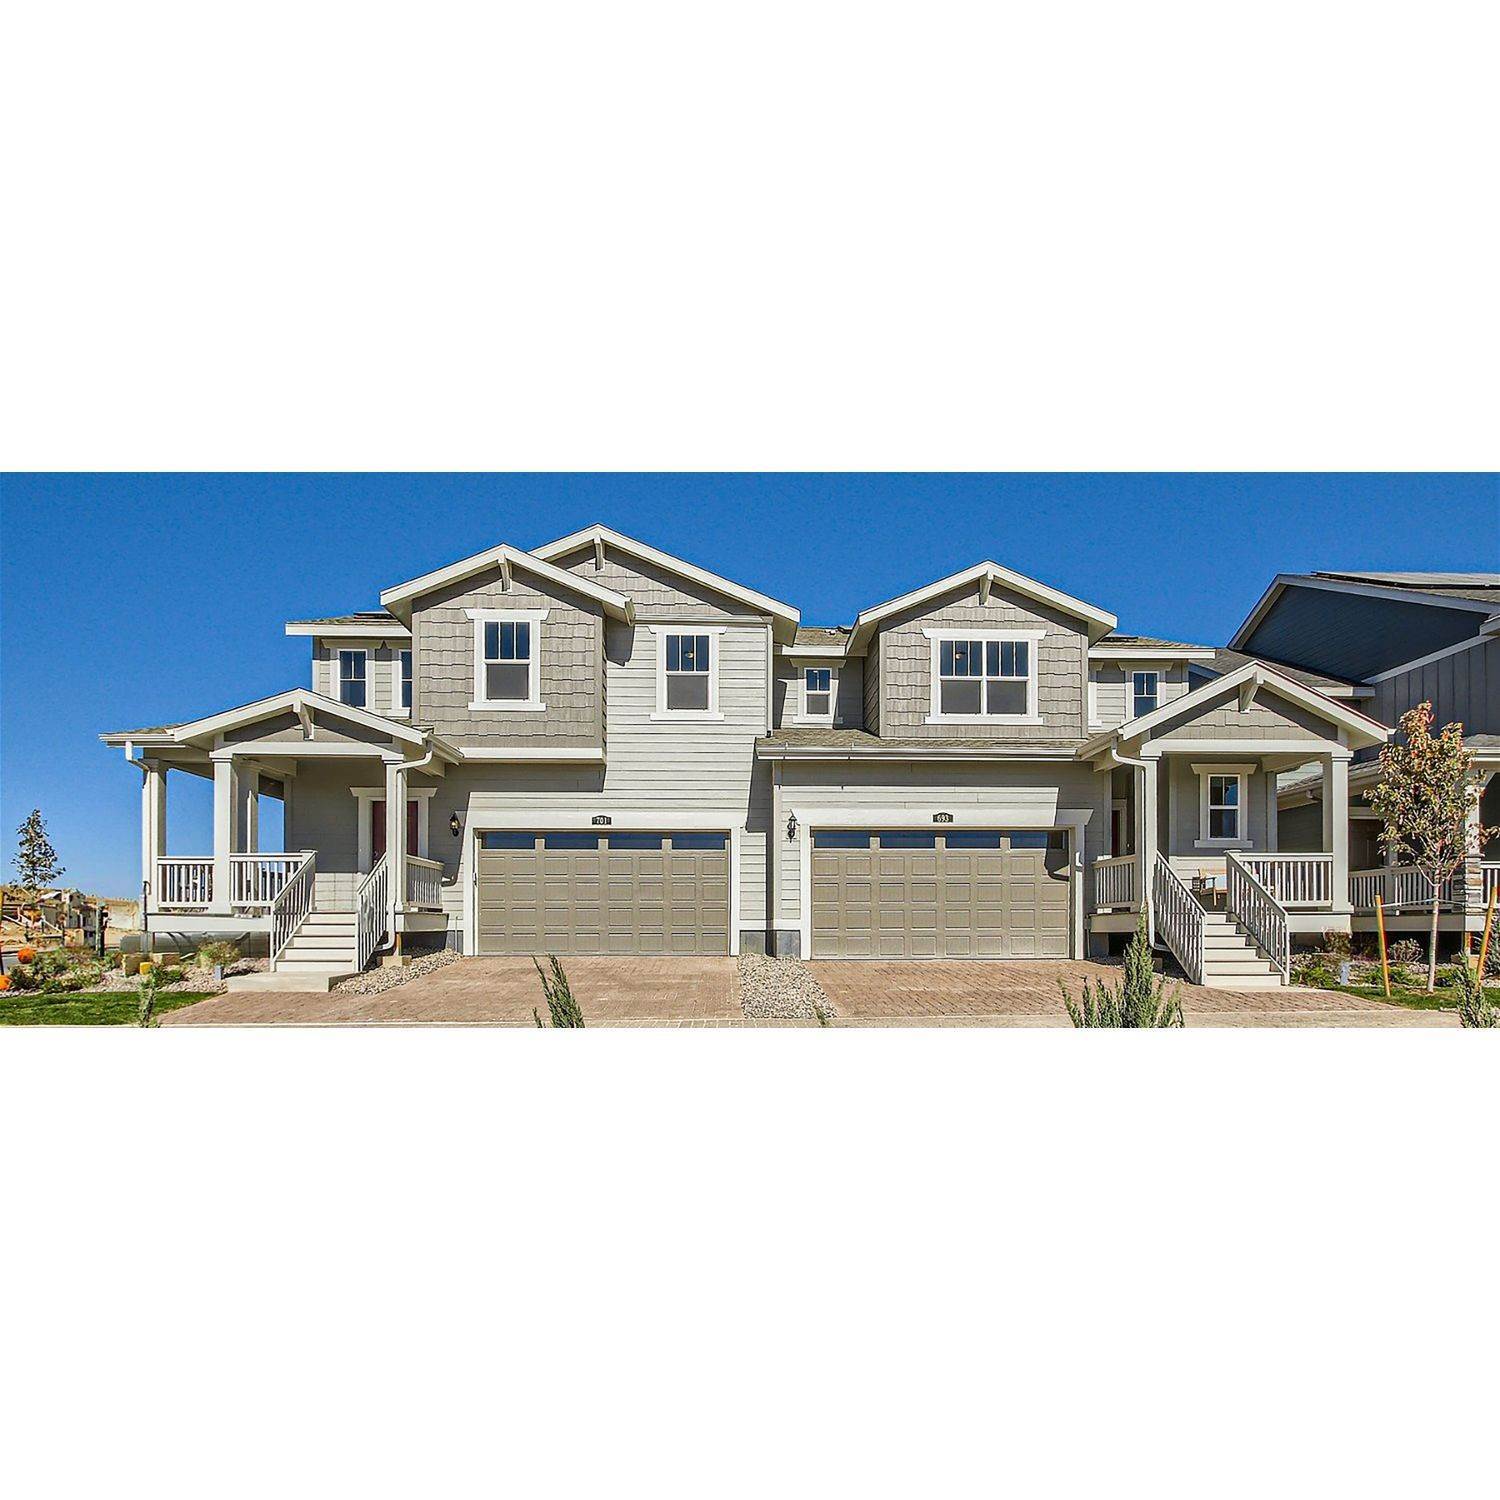 Parkdale - Paired Homes κτίριο σε 701 Hedgerow Drive, Erie, CO 80516